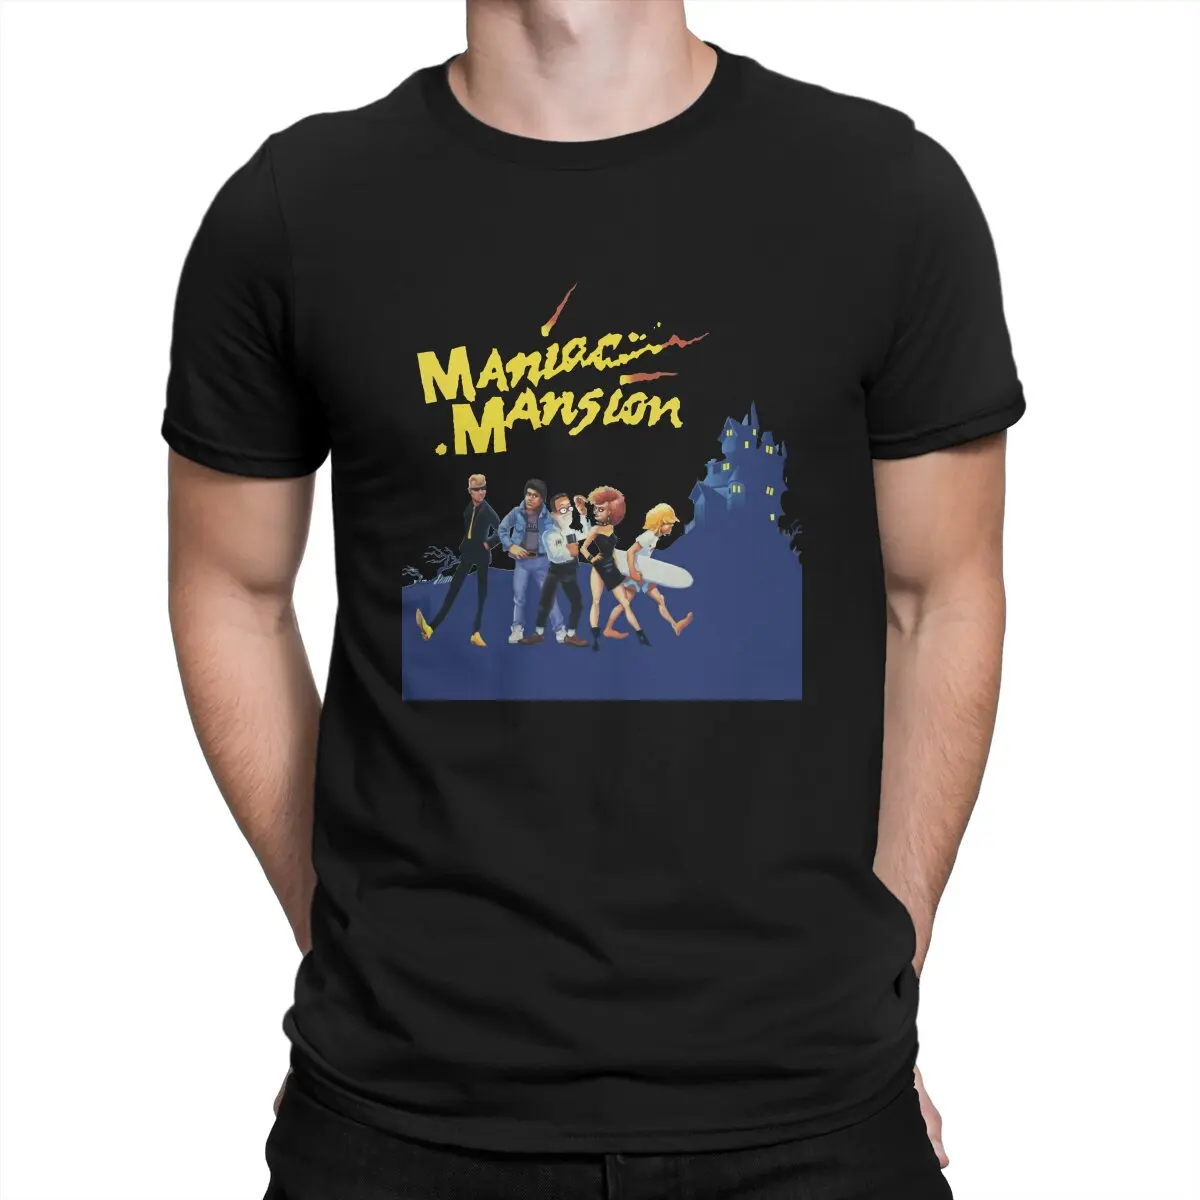 

Leisure Maniac Mansion T-Shirt for Men Crew Neck Cotton T Shirt Day Of The Tentacle Game Short Sleeve Tee Shirt 4XL 5XL Clothing